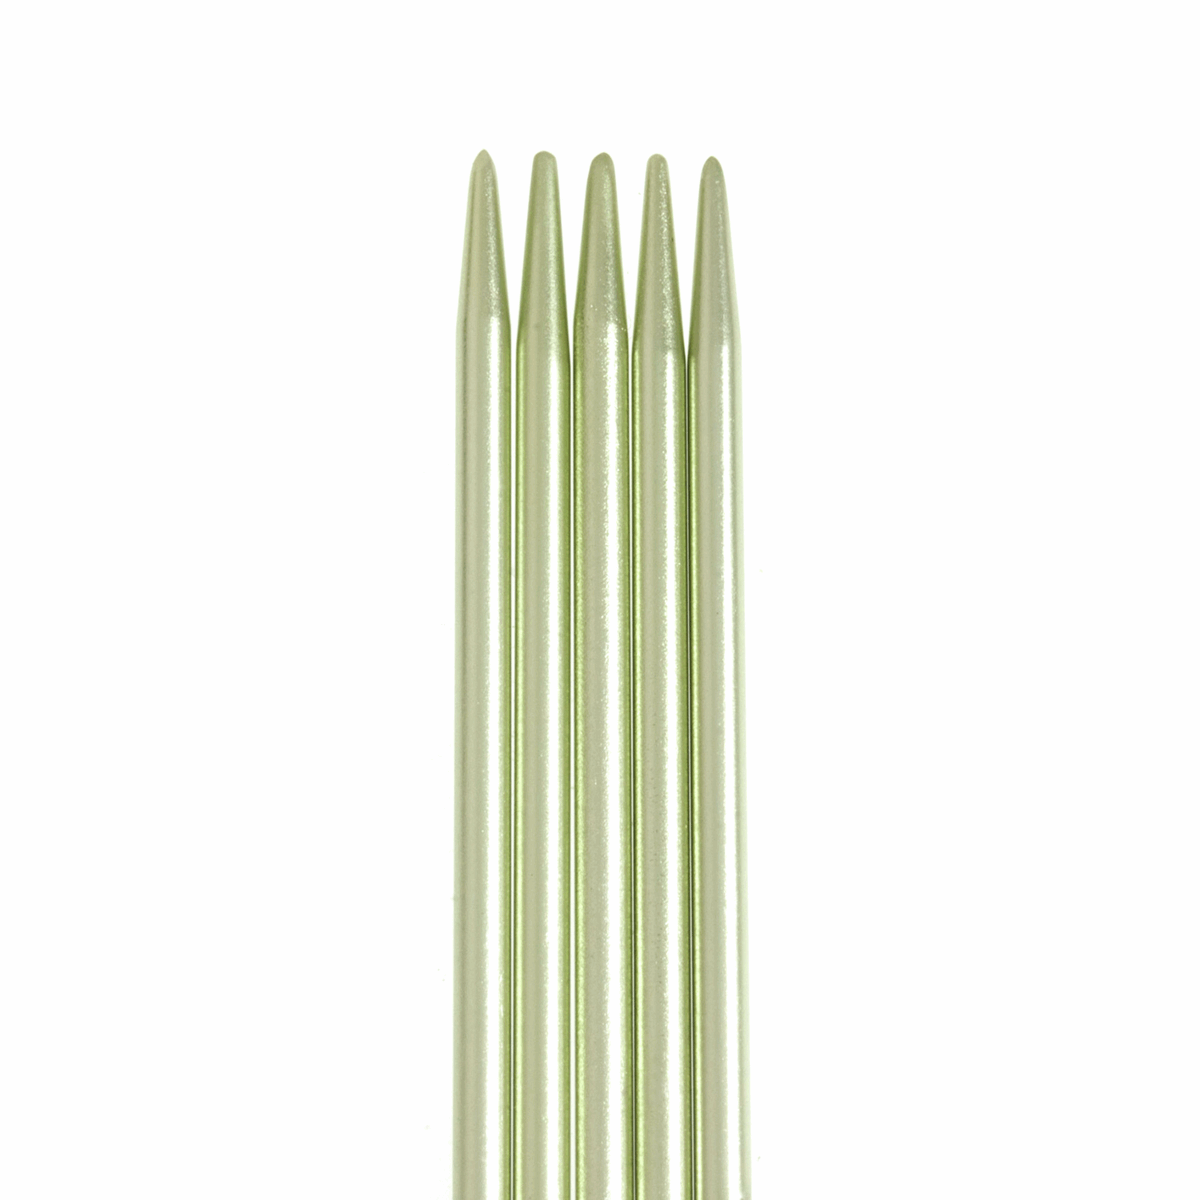 PONY Double-Ended Coloured Aluminium Knitting Pins - 20cm x 2.50mm (Set of 5)